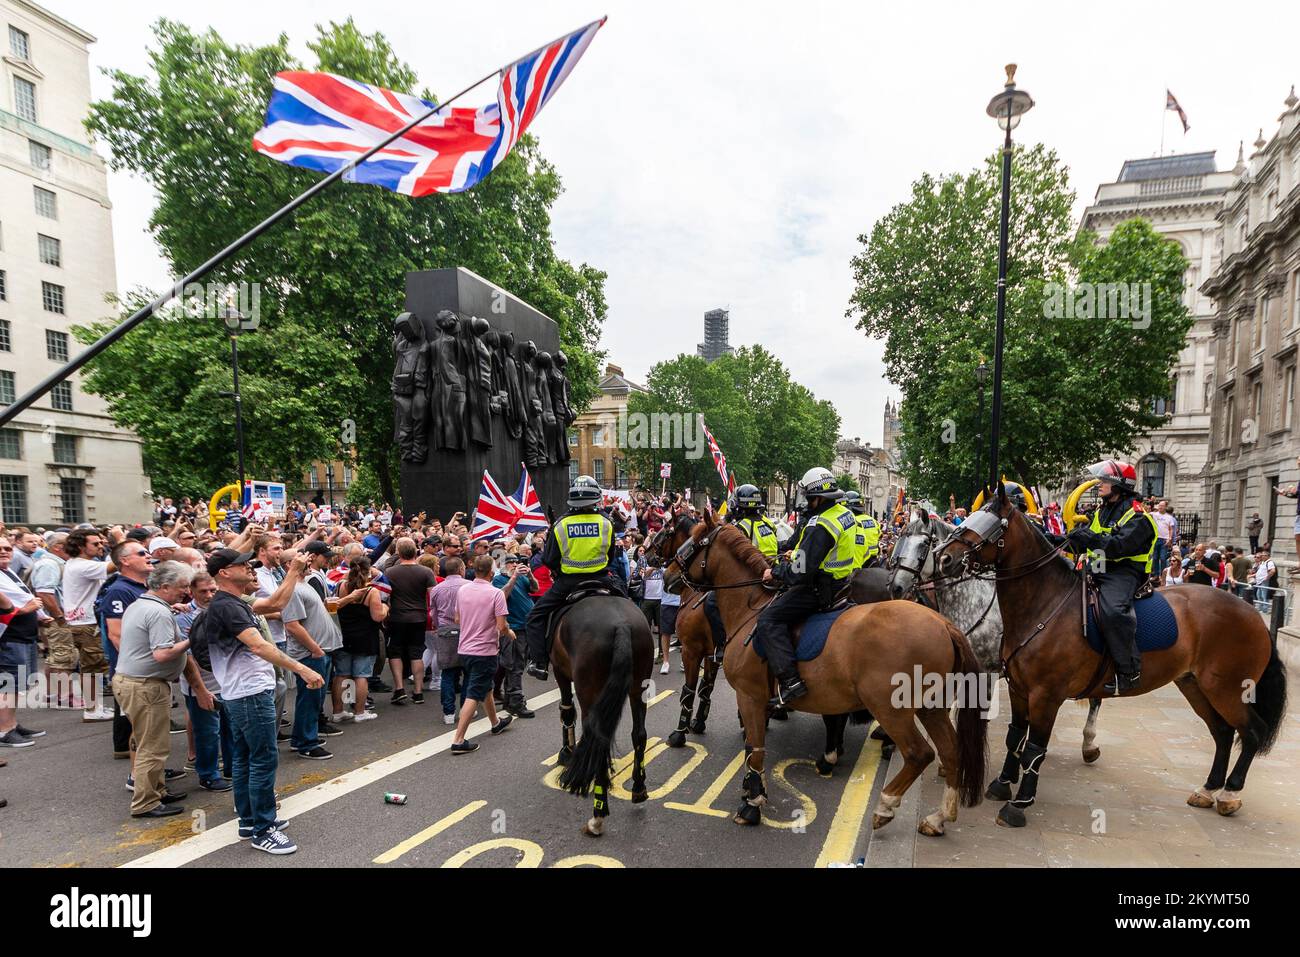 Supporters of Tommy Robinson, such as the EDL, protested in London demonstrating for his release after arrest. Mounted police in Whitehall policing Stock Photo